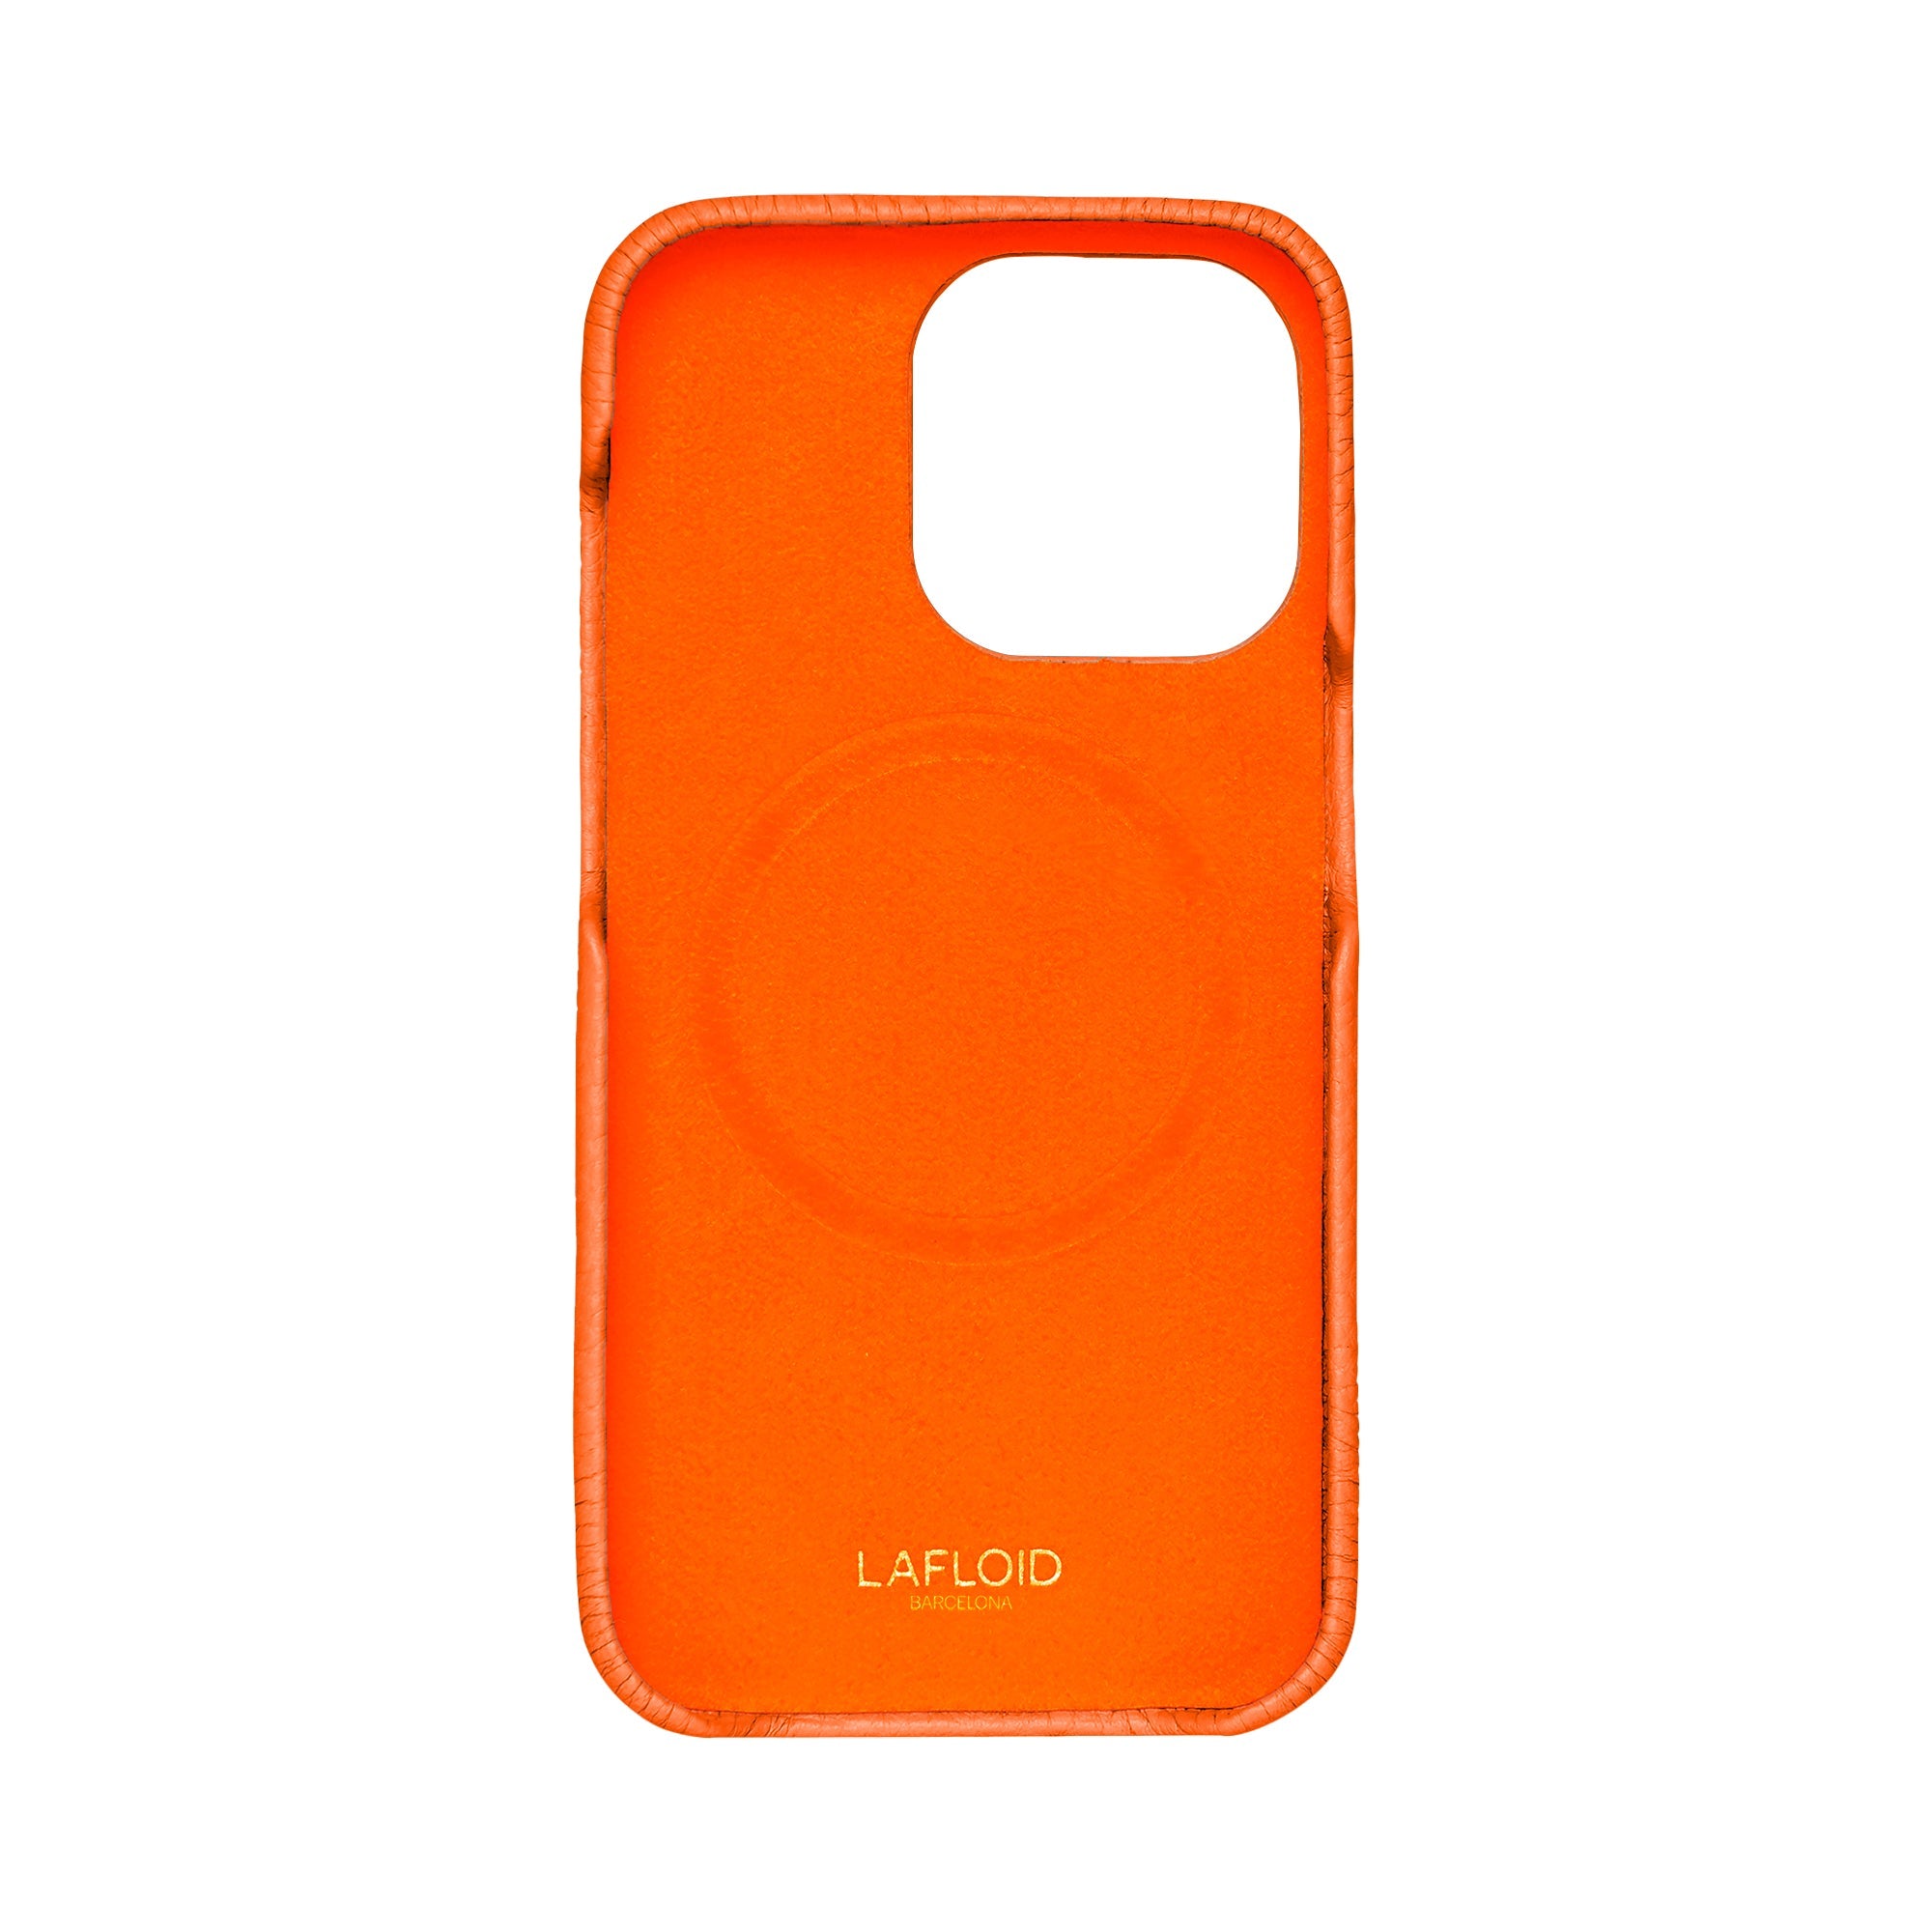 iPhone 14 Pro Max case - for testing